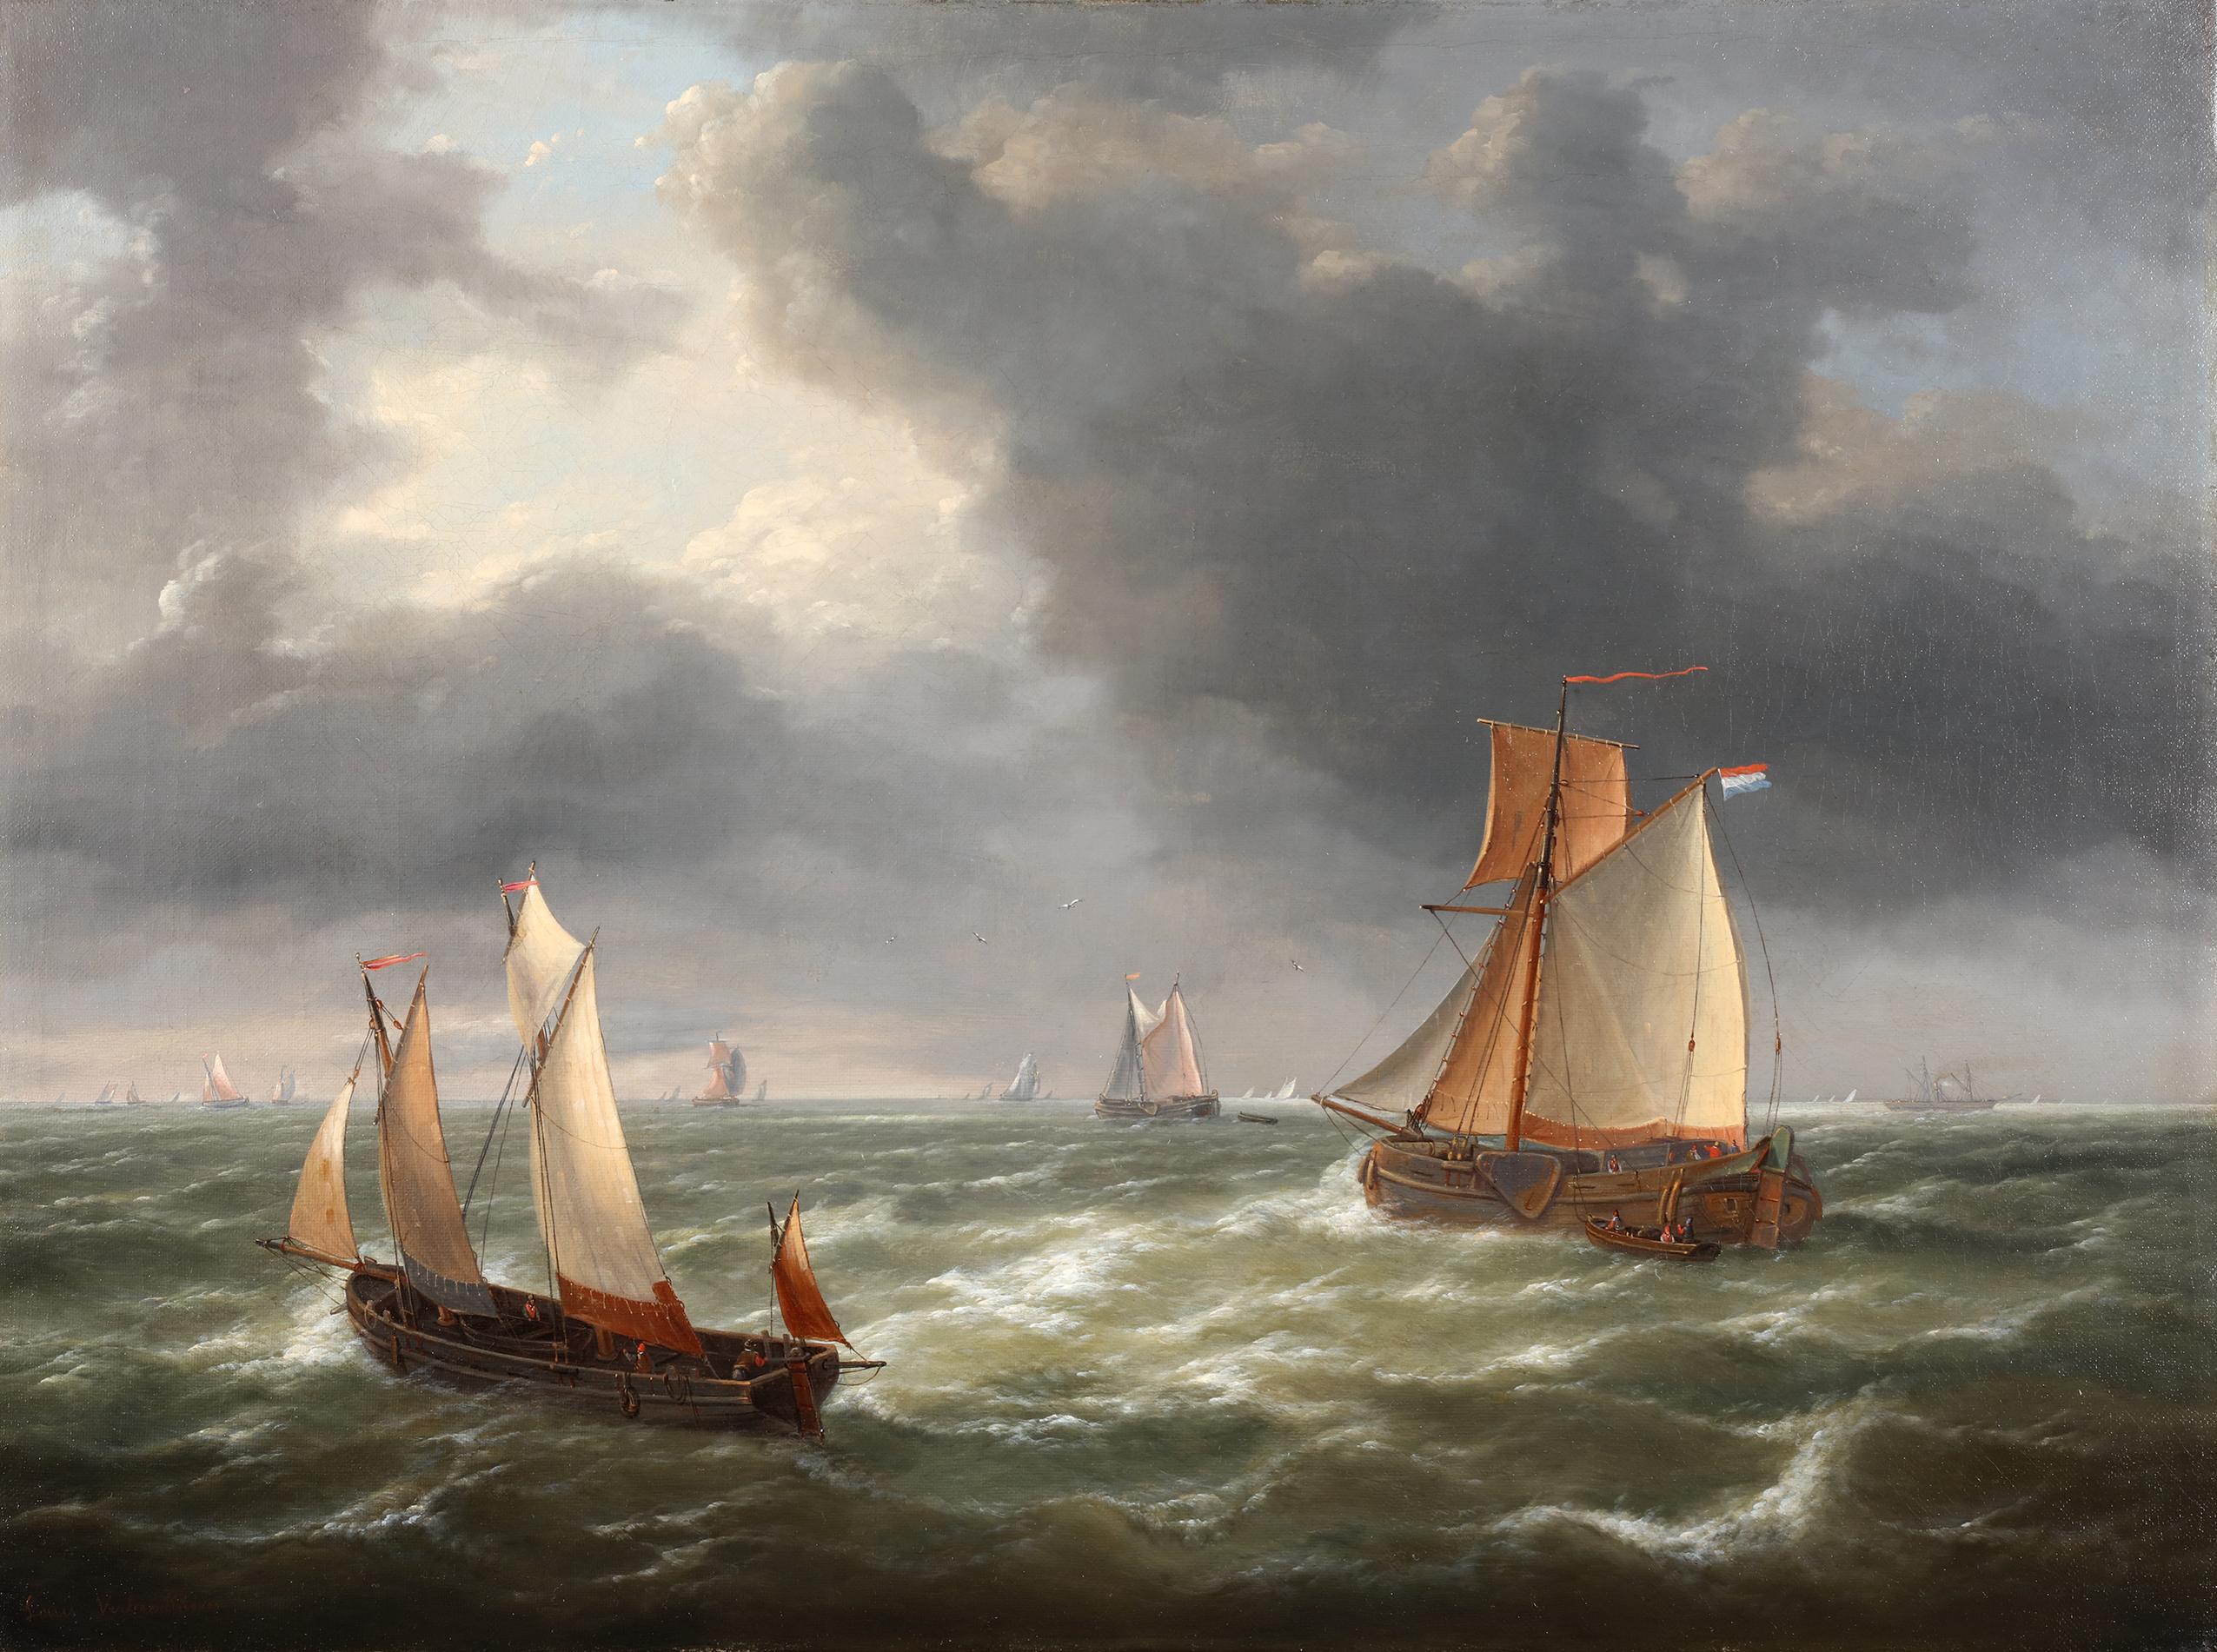 Oil on canvas

Signed lower left: “Louis Verboeckhoven”

Dimensions: 53 x 70 cm, 79 x 97 cm (framed)


“Ships in open water,” is an artwork by Charles-Louis Verboeckhoven presenting an atmospheric portrayal of maritime life. The painting captures a